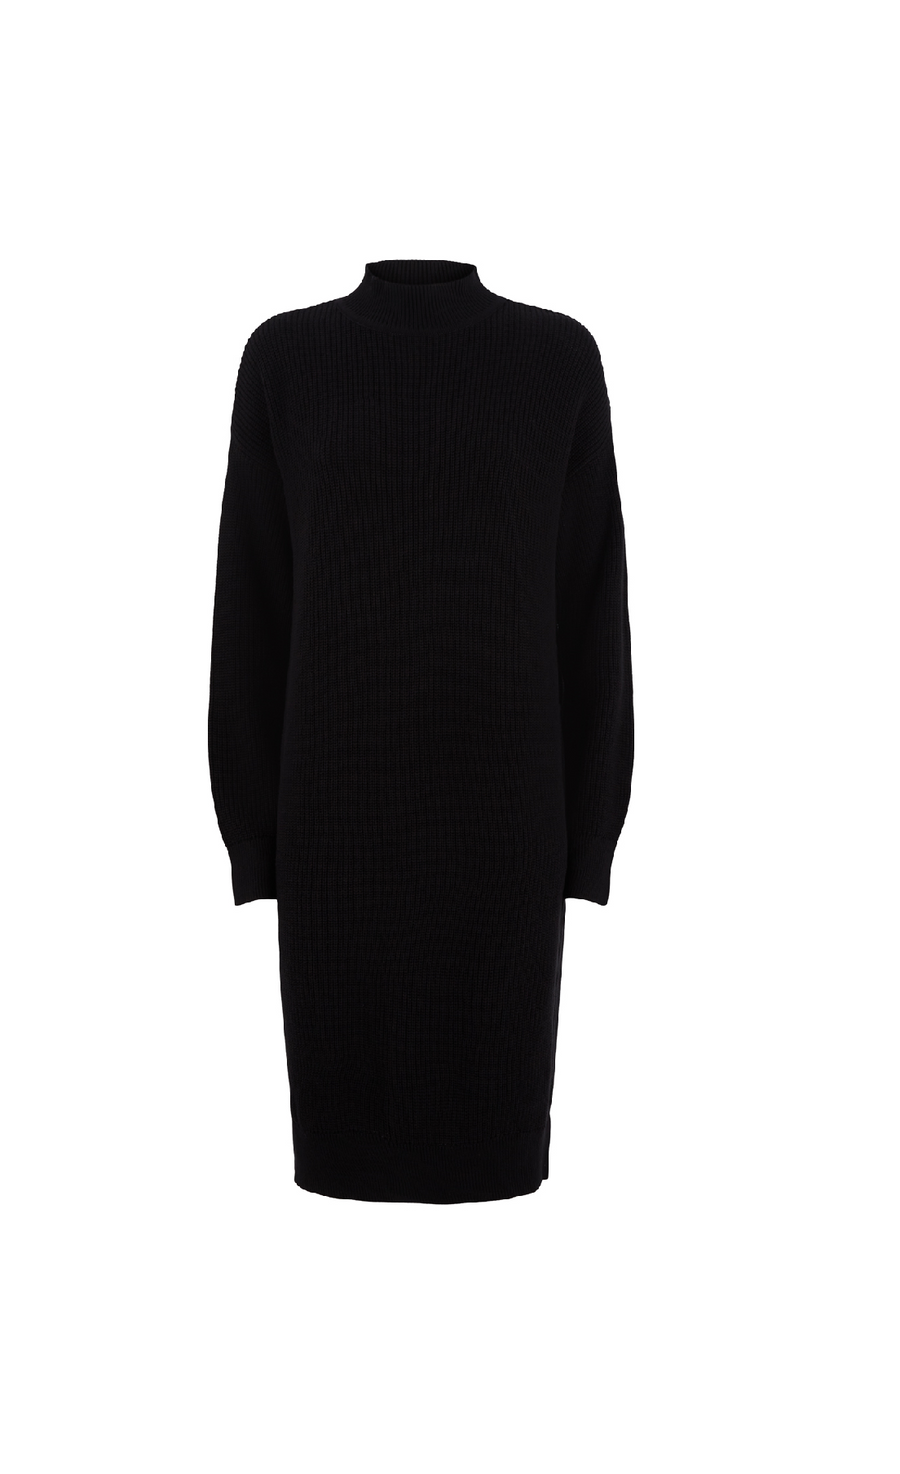 Harley Knitted Dress in Black